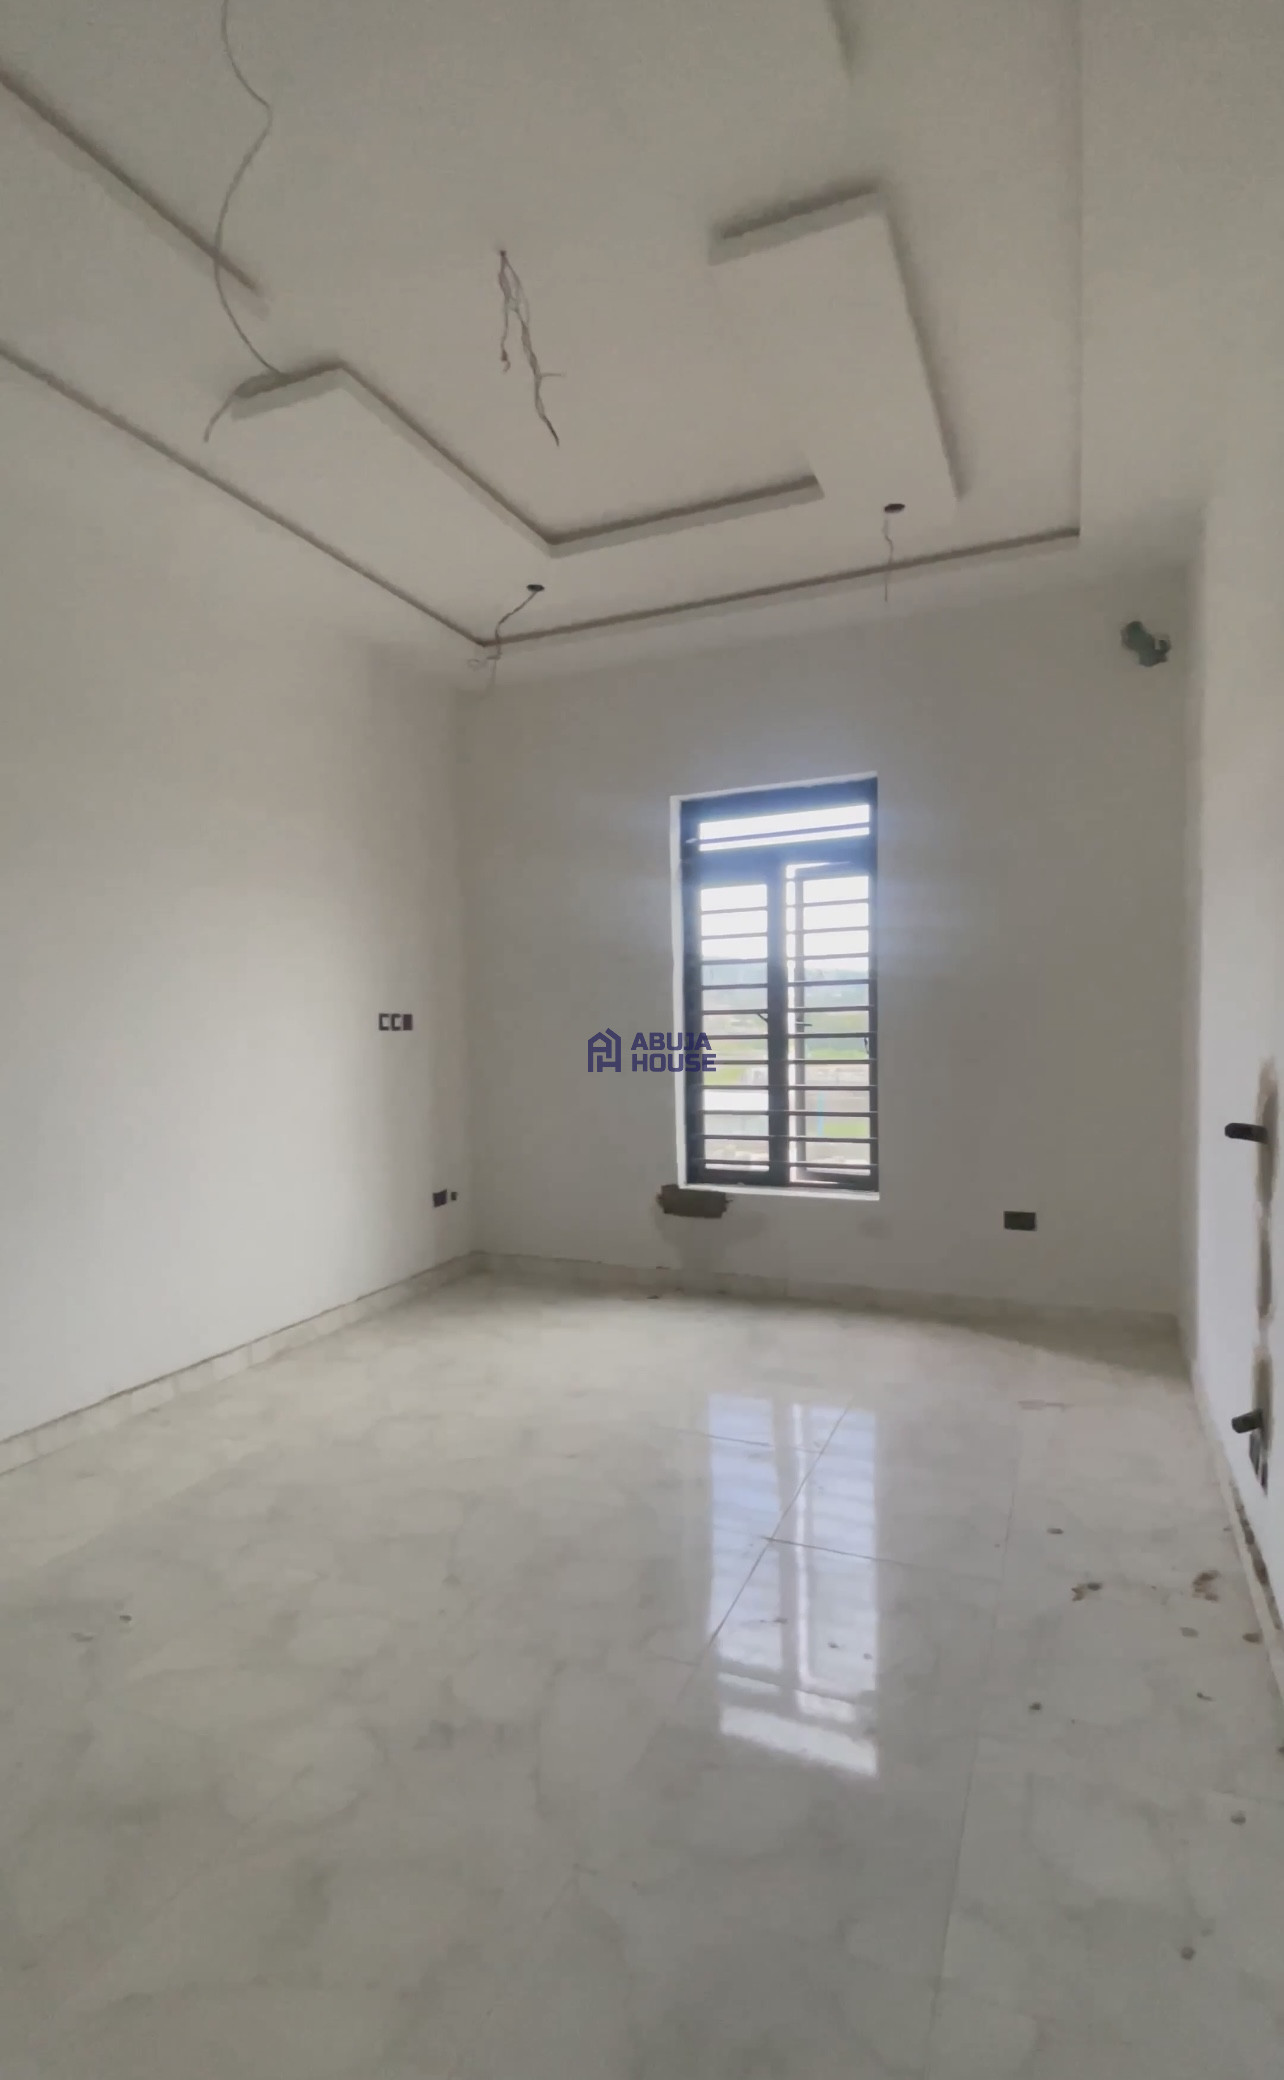 Magnificent 5 bedroom terrace building with swimming pool available in jahi